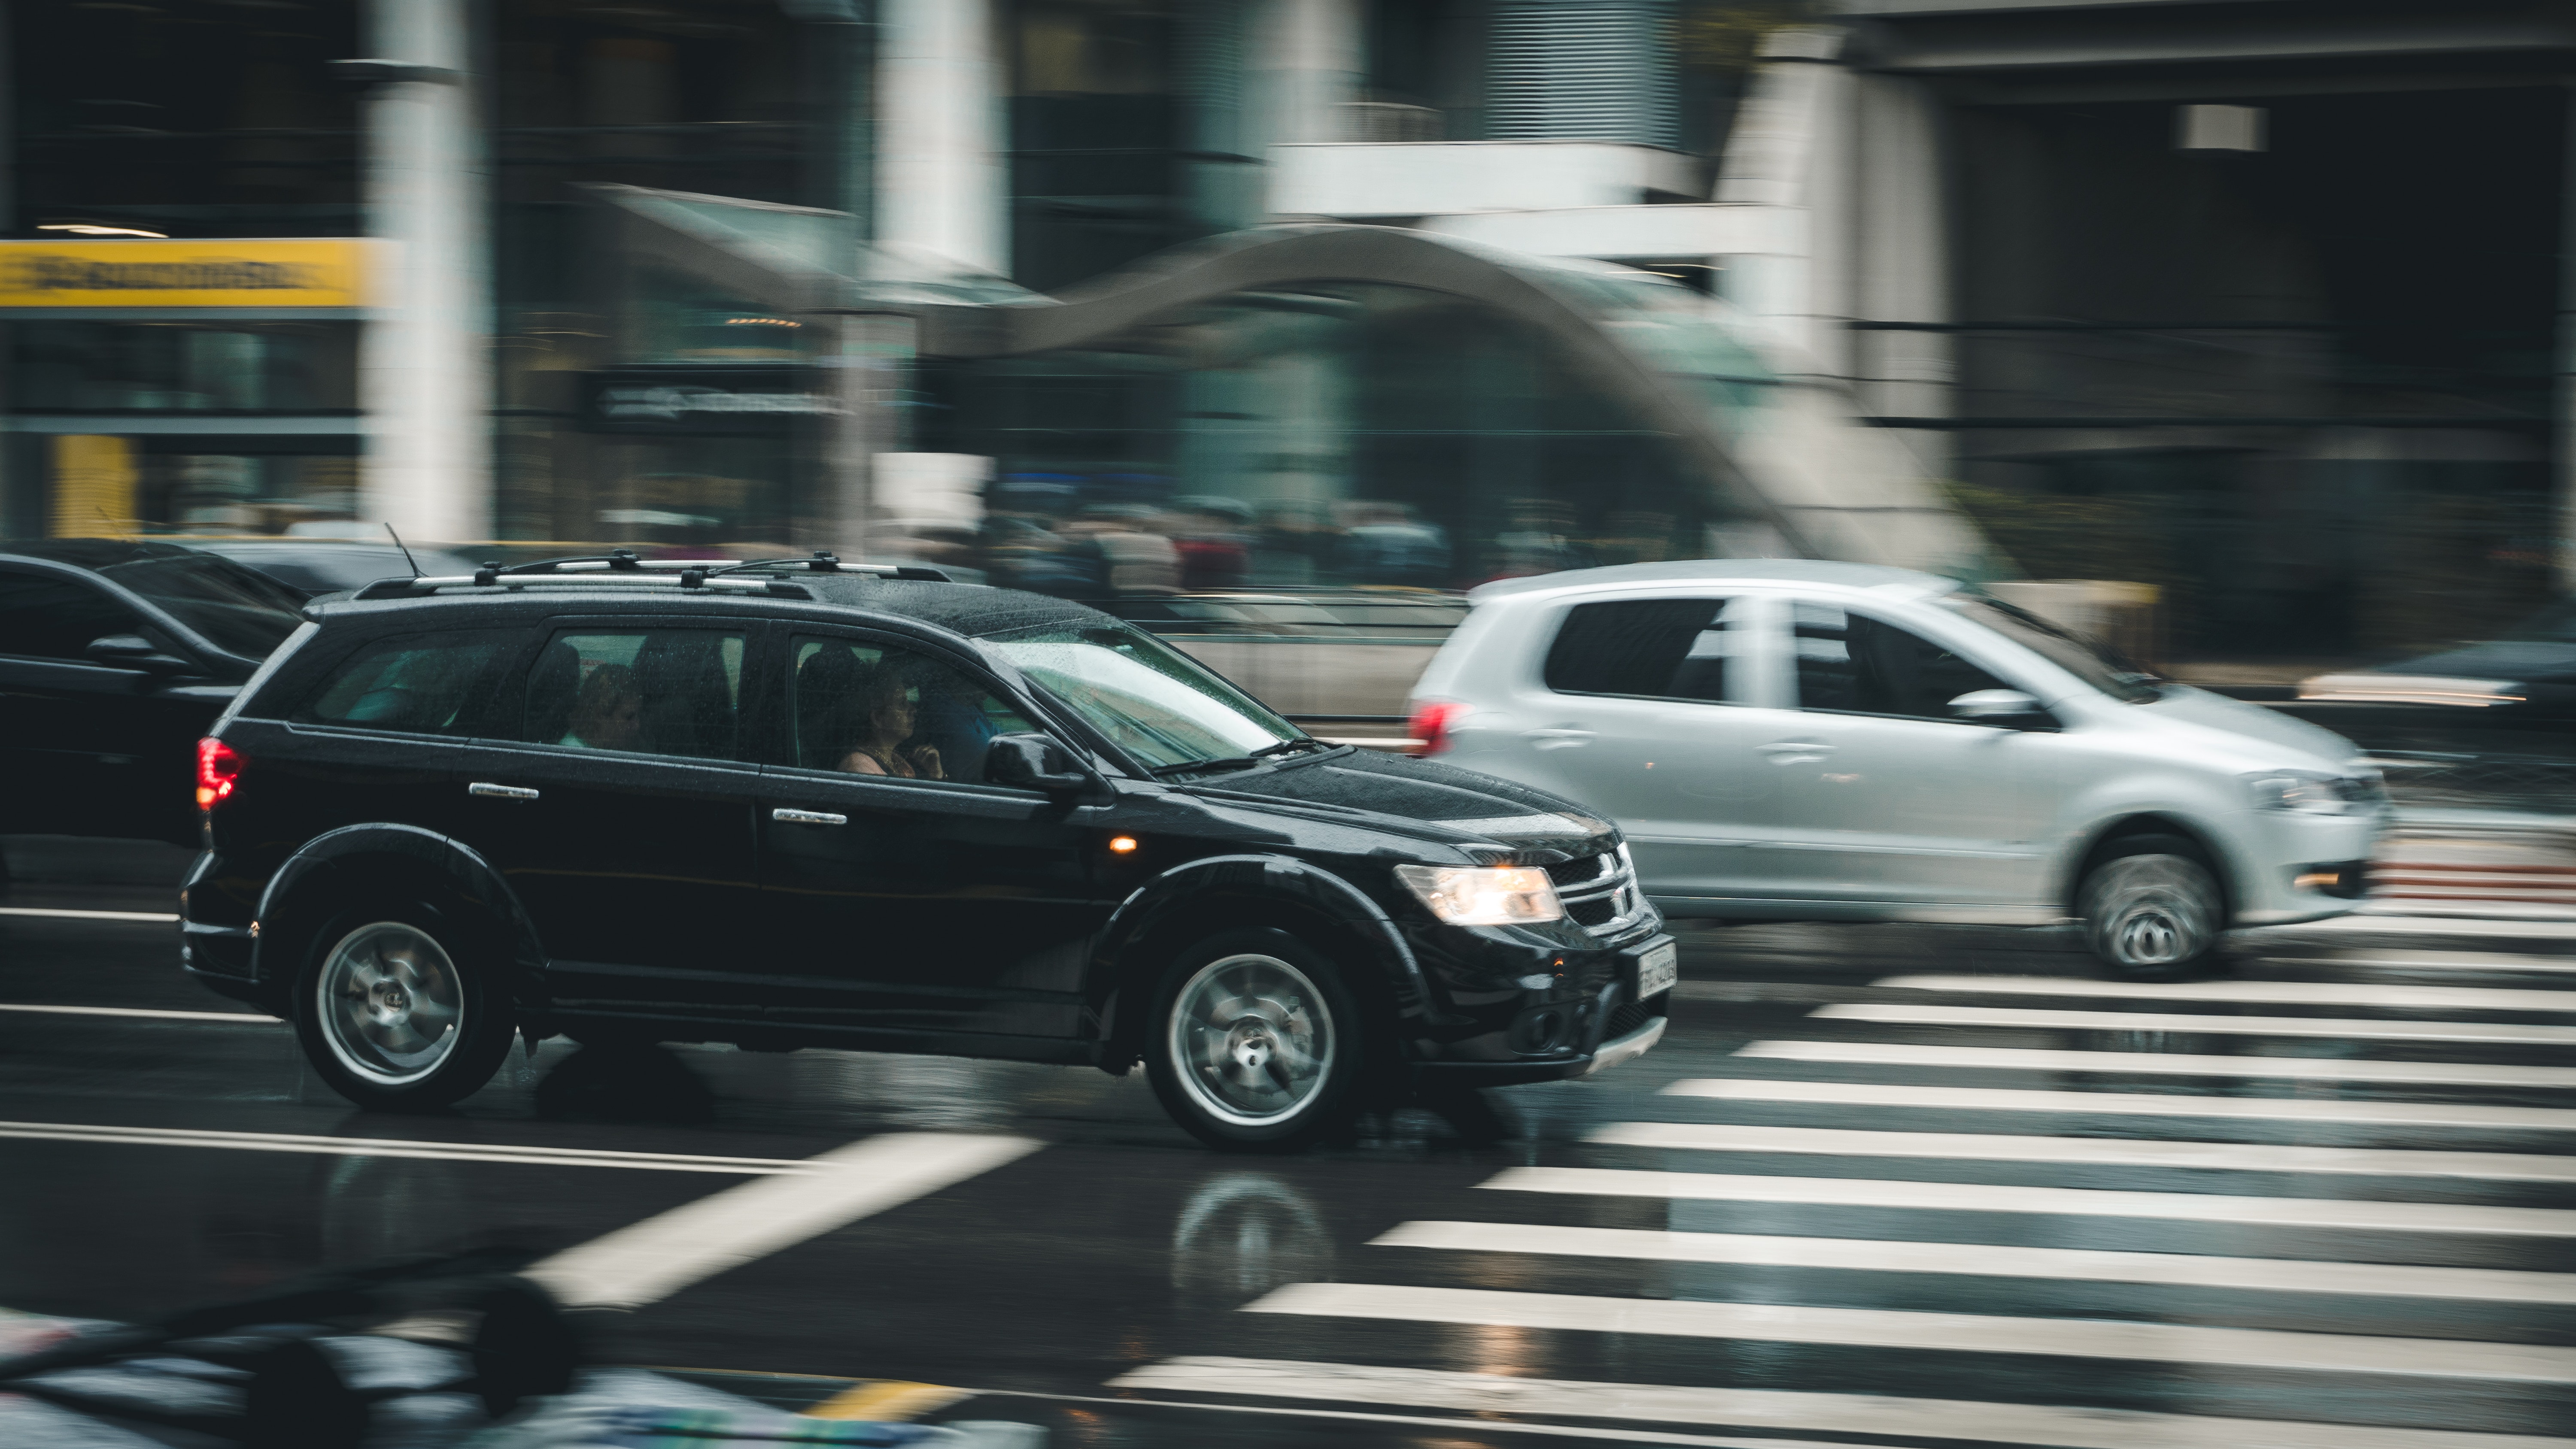 Safer Vehicle Designs May Reduce Pedestrian Fatalities